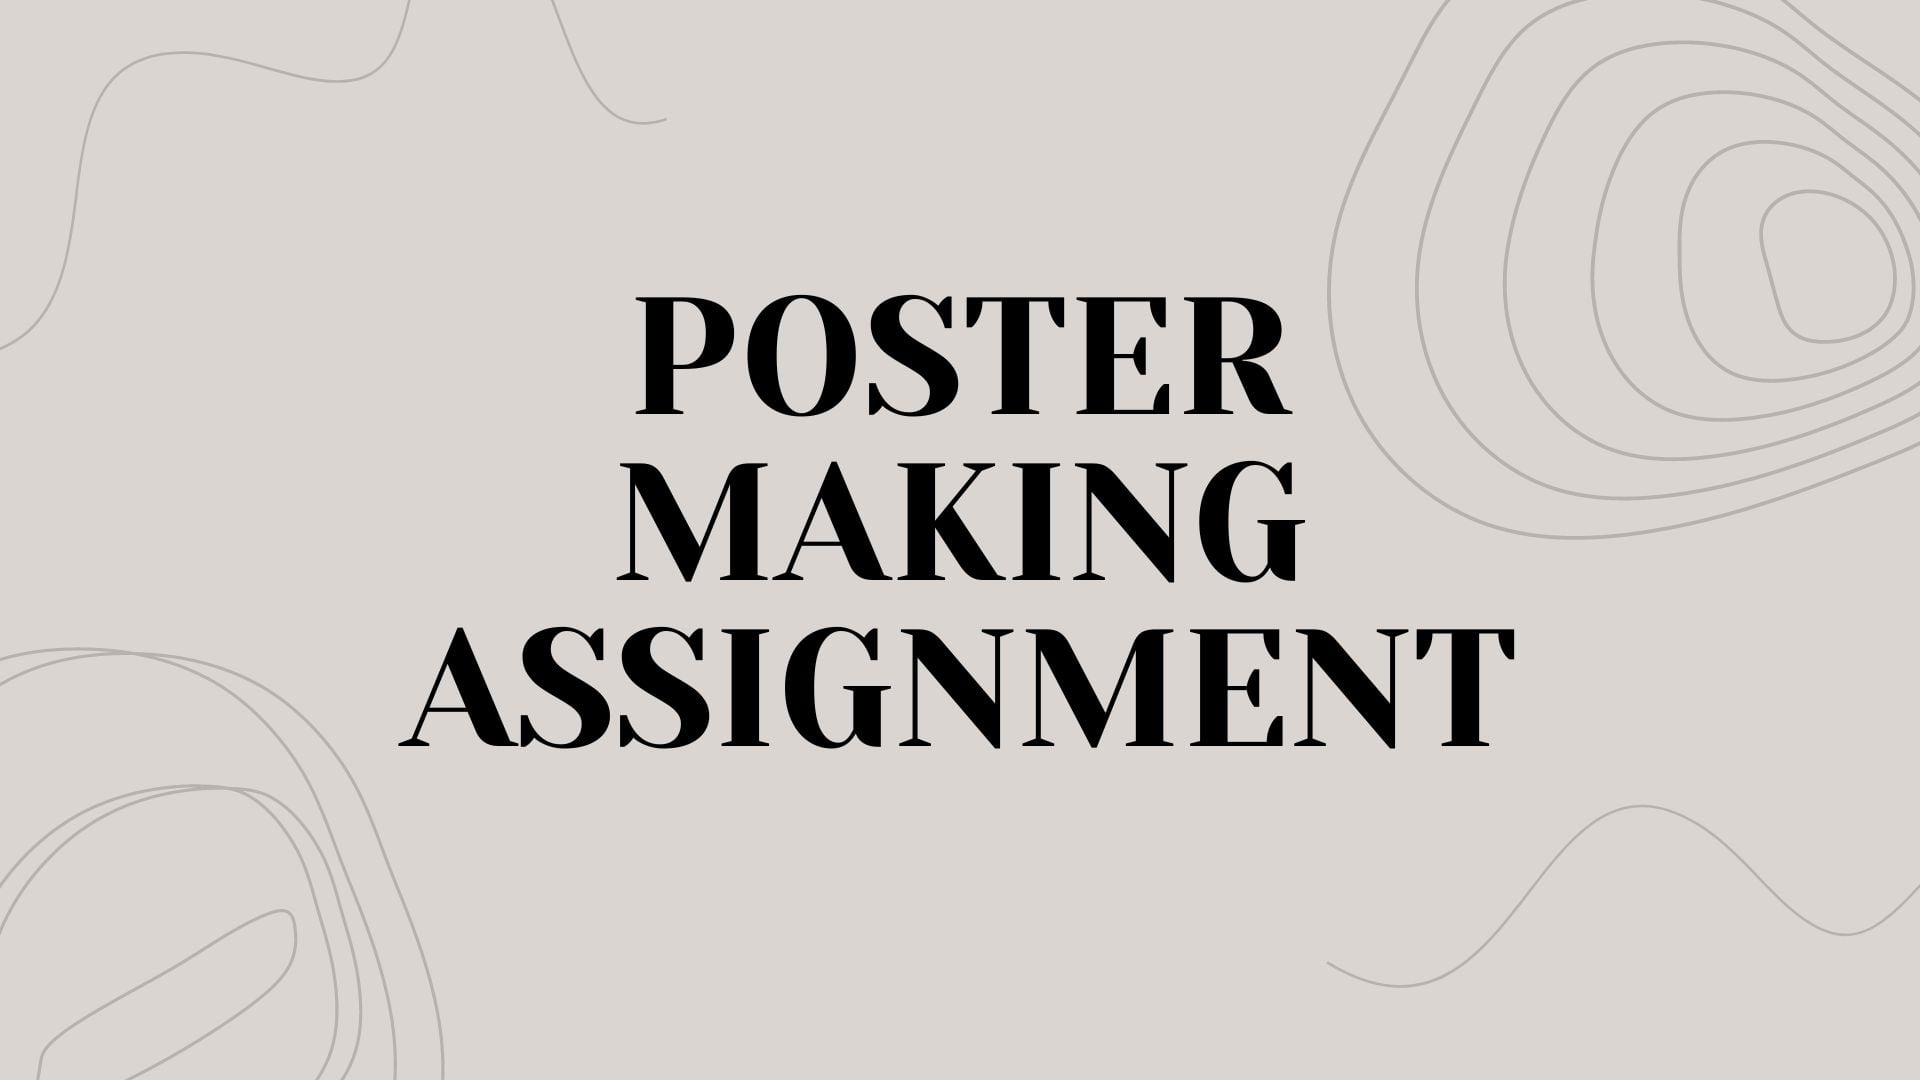 POSTER MAKING ASSIGNMENT